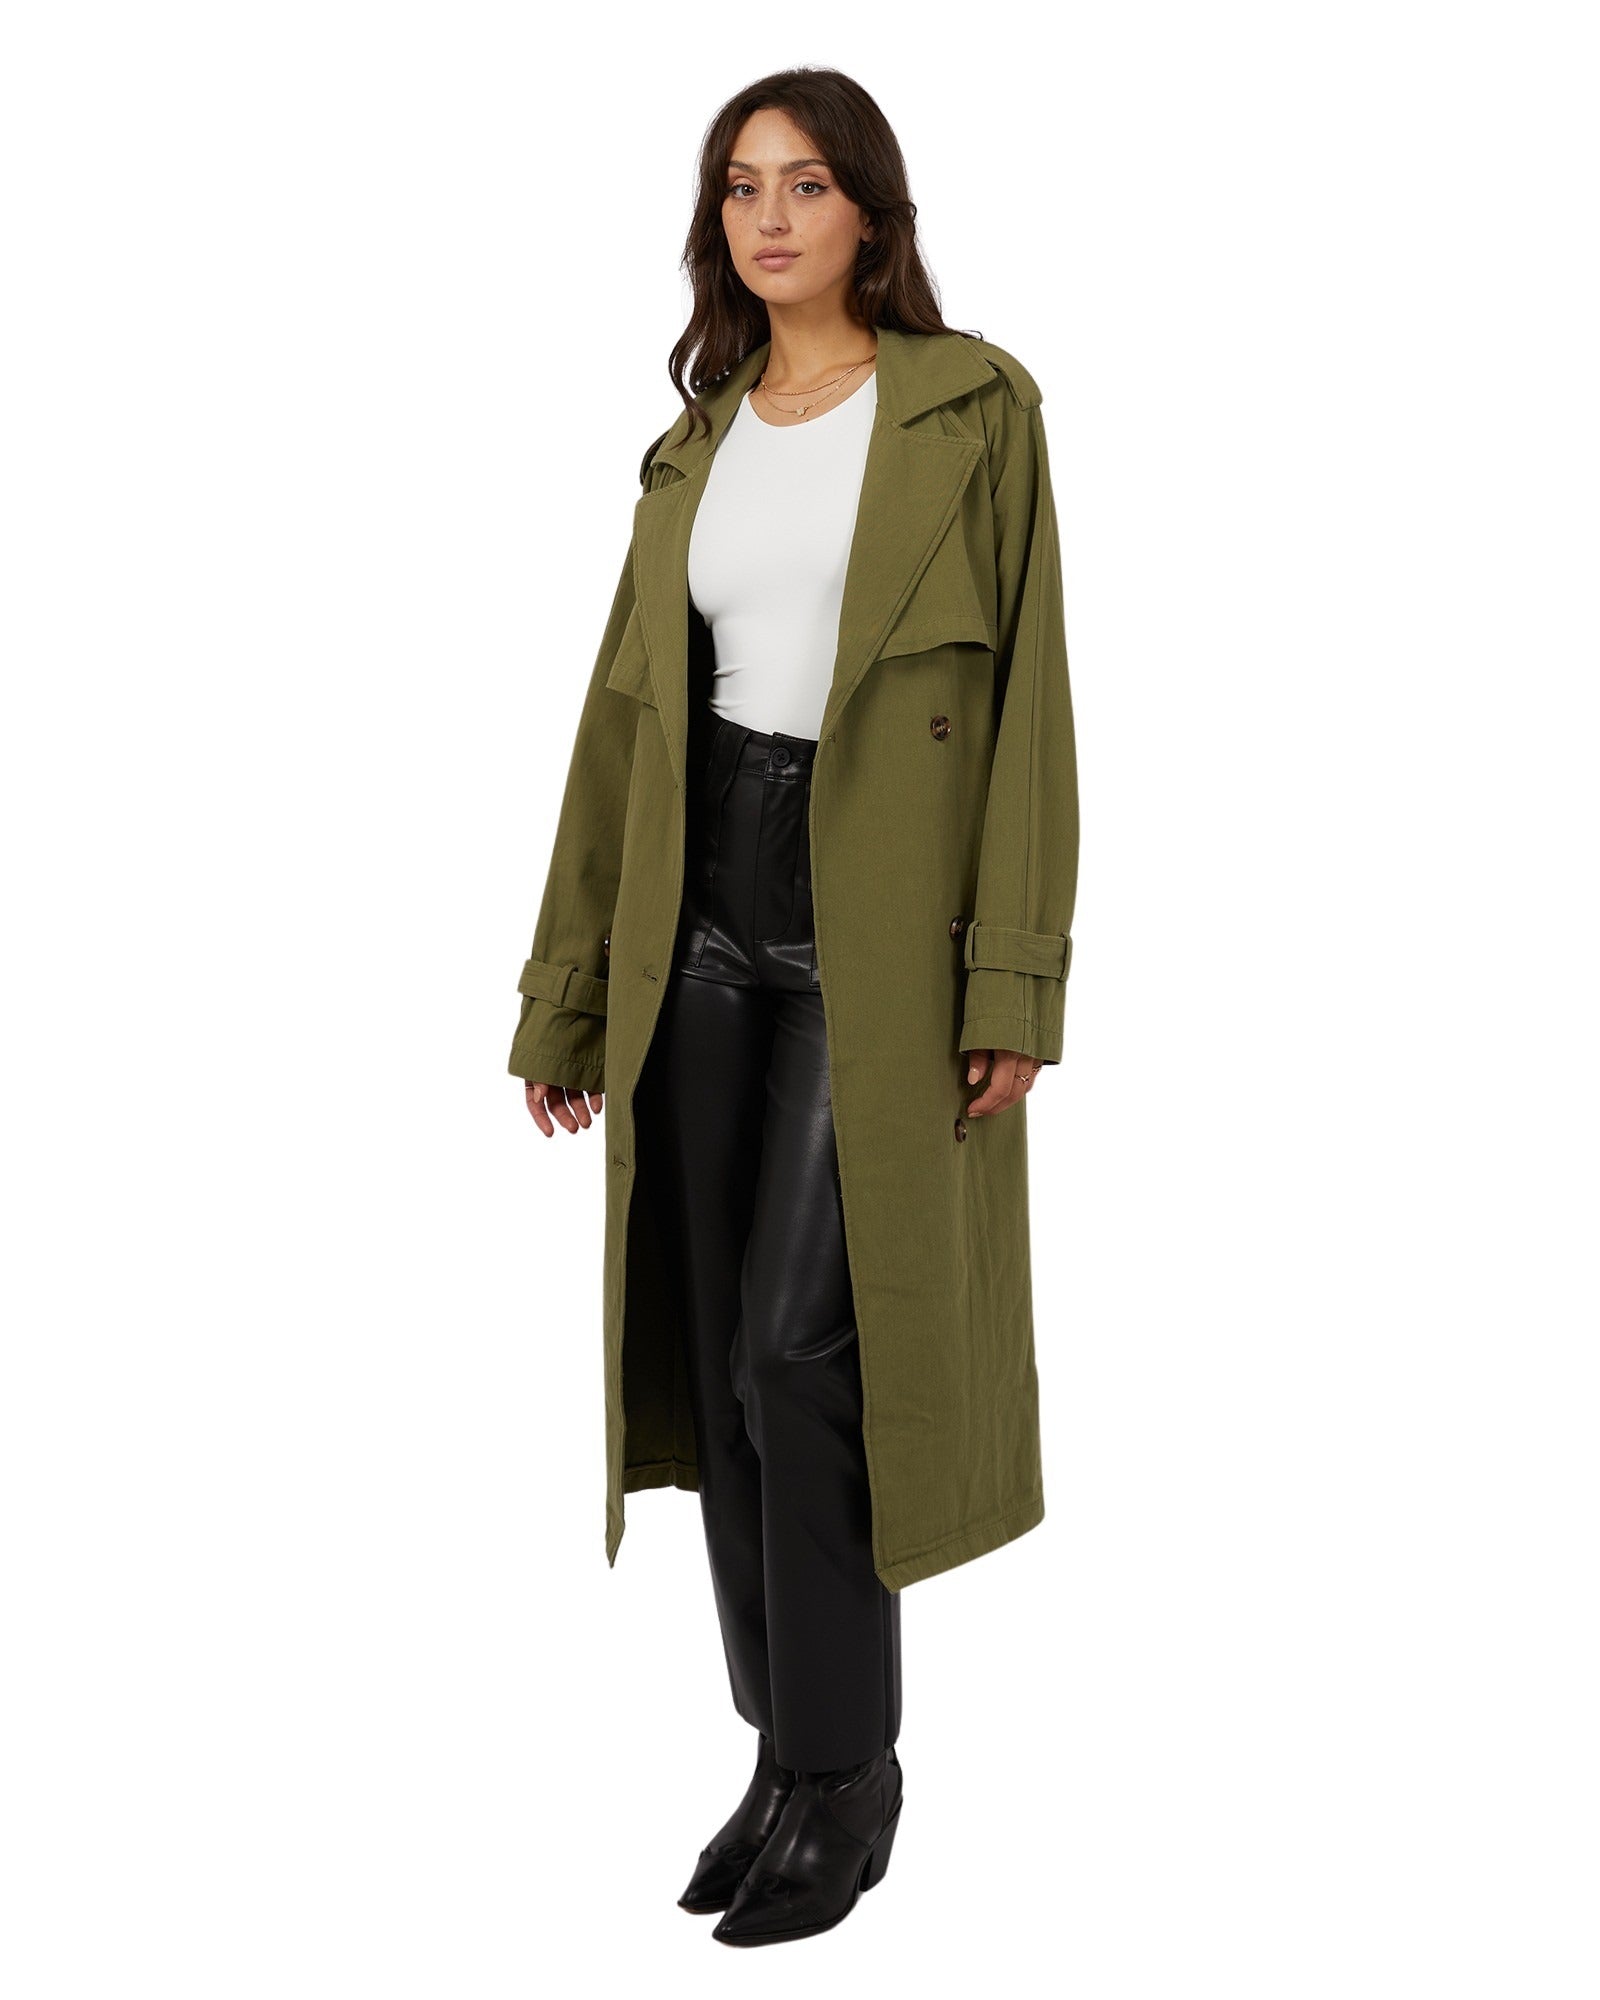 All About Eve - Eve Trench Coat - Khaki